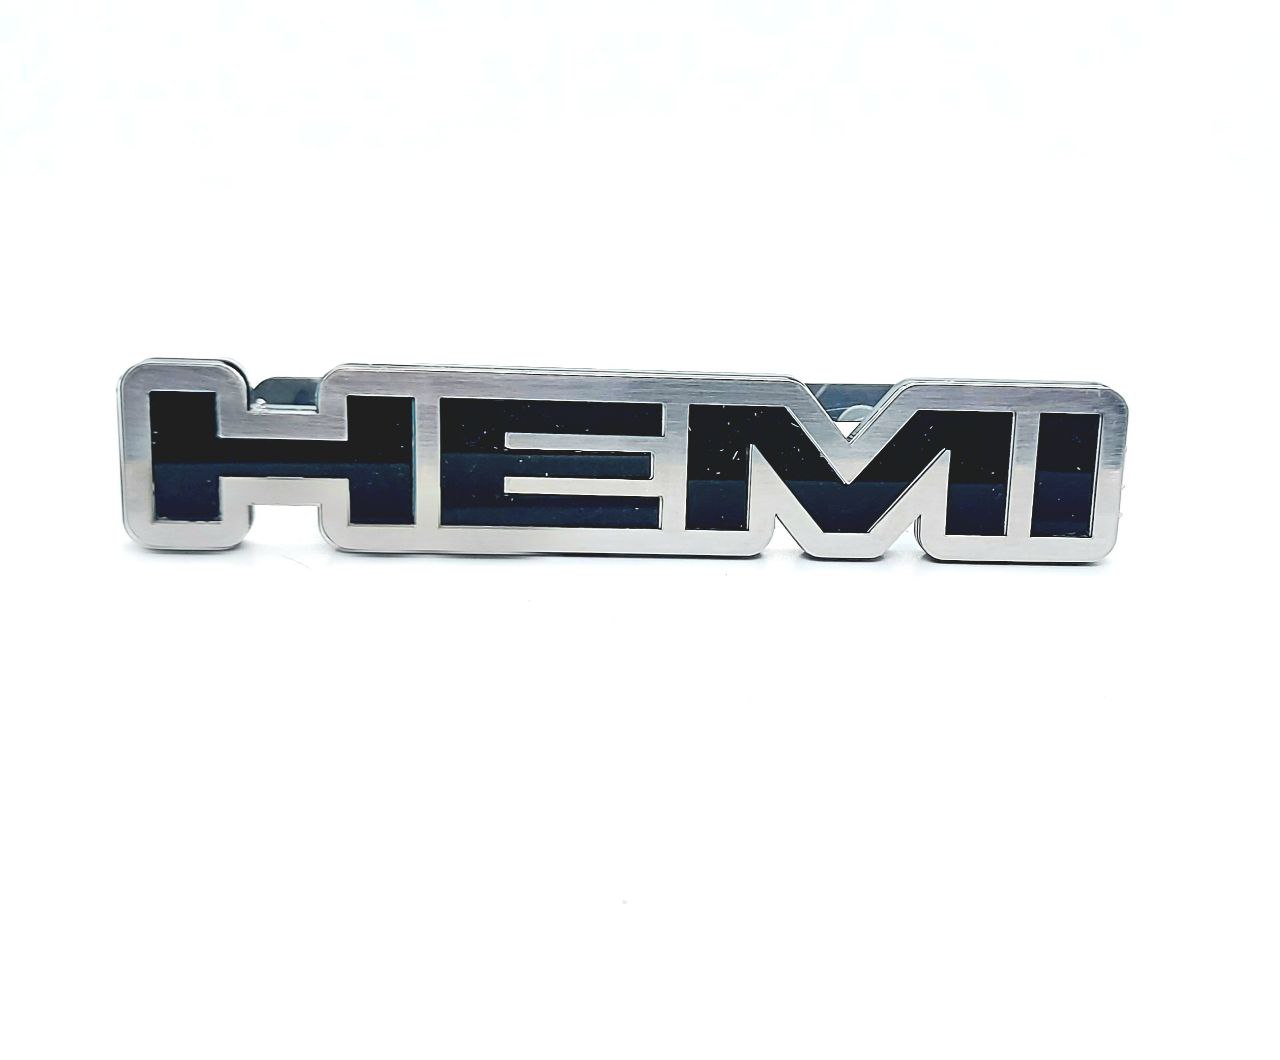 JEEP Stainless Steel Radiator grille emblem with HEMI logo - decoinfabric